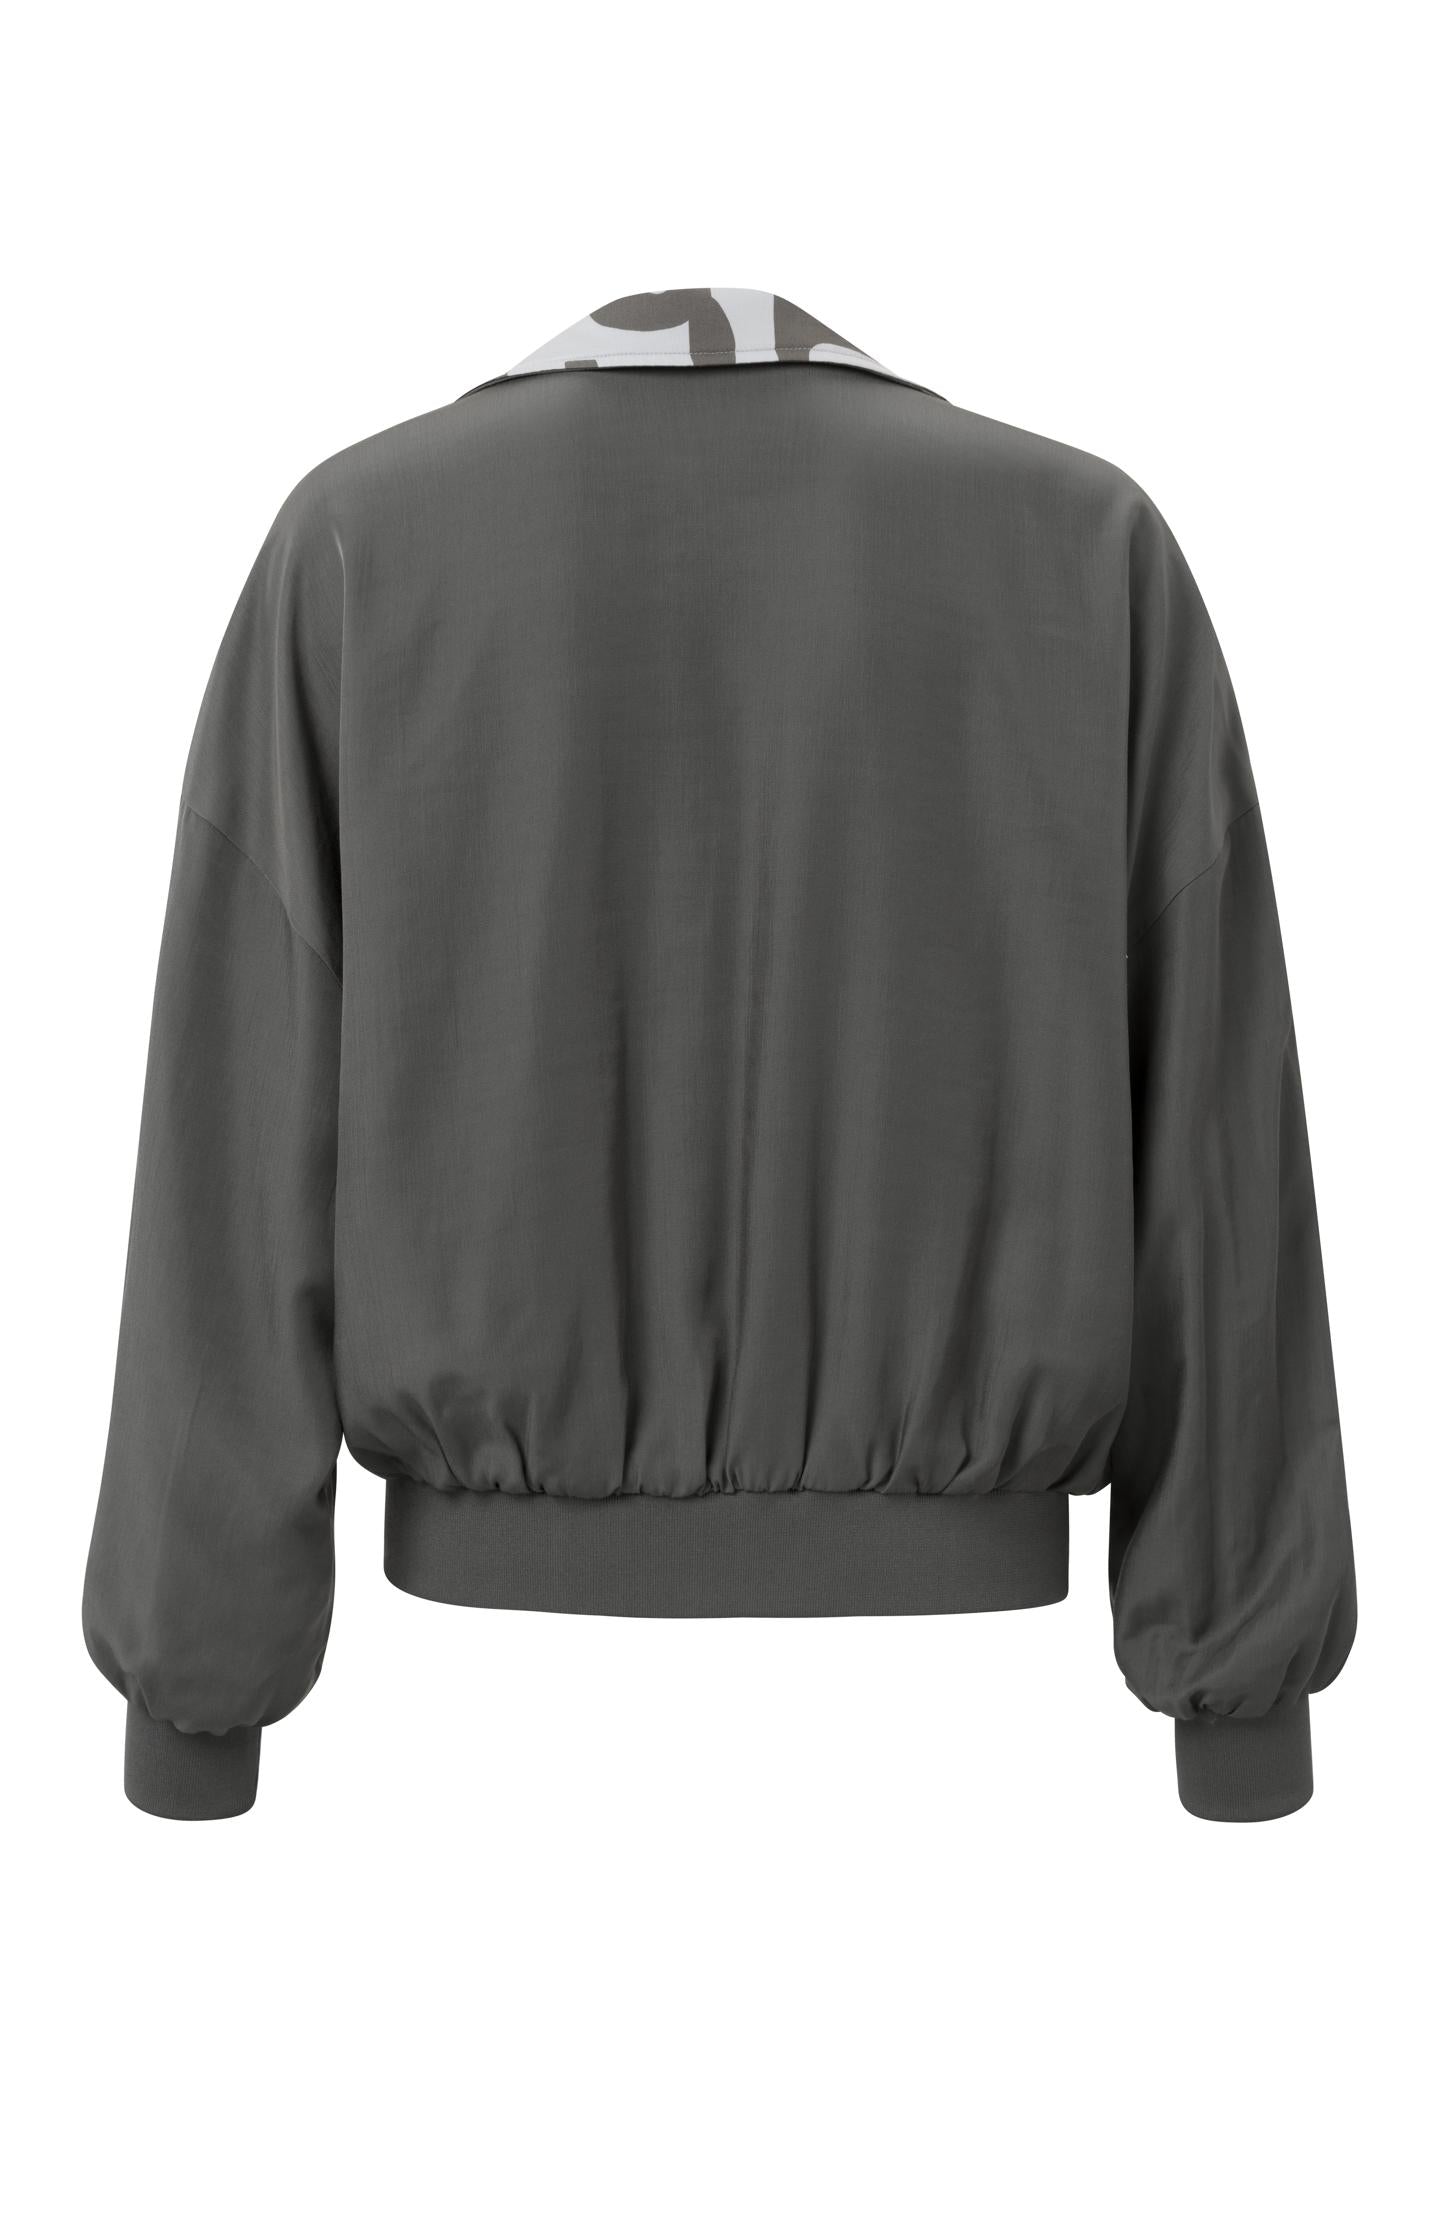 Reversible bomber jacket with 7/8 balloon sleeves and zip